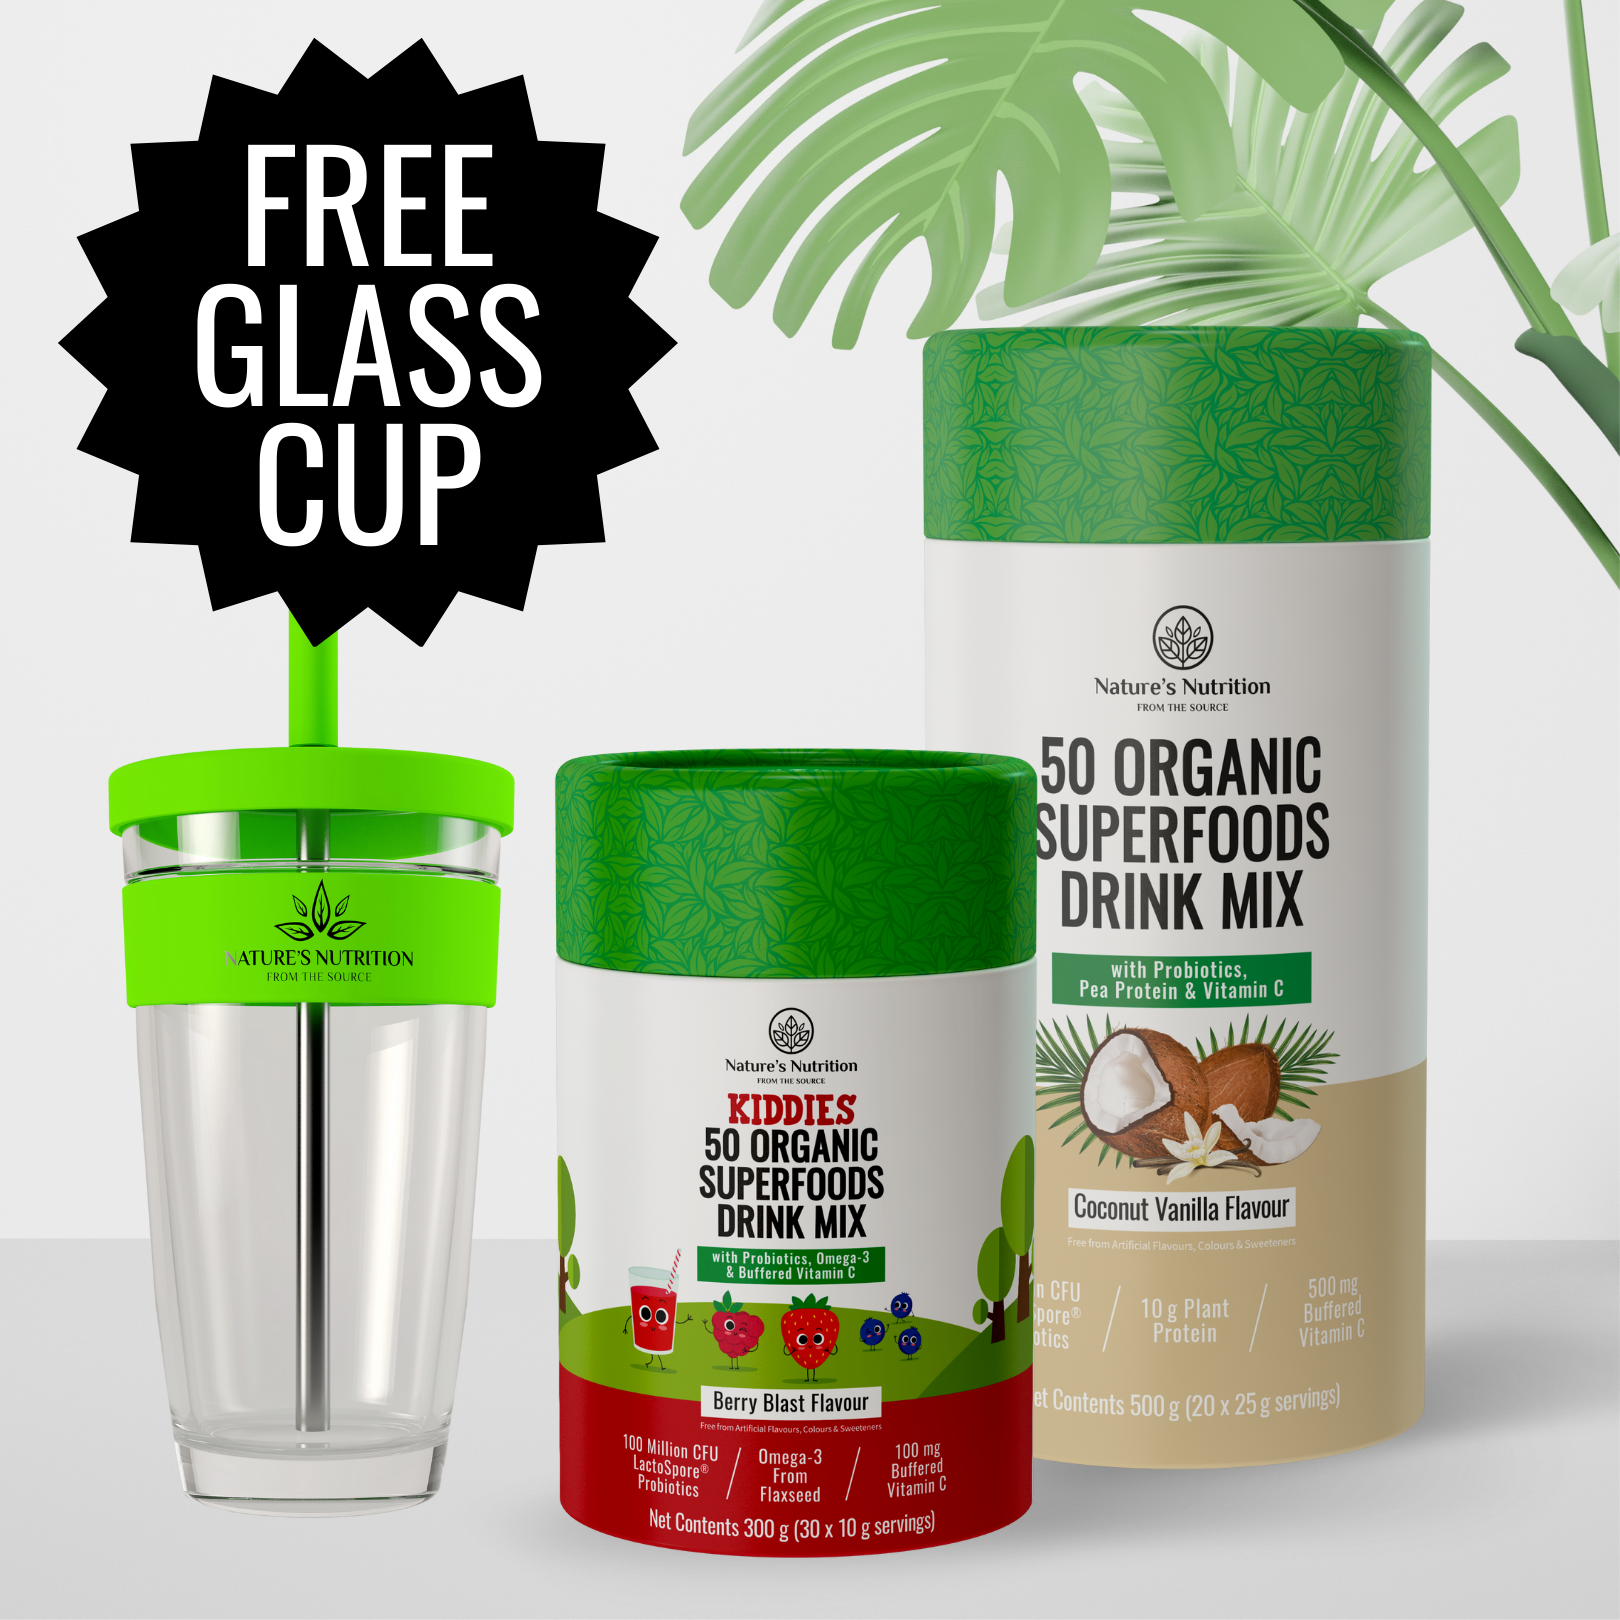 Superfoods and Kiddies + Free Glass Cup